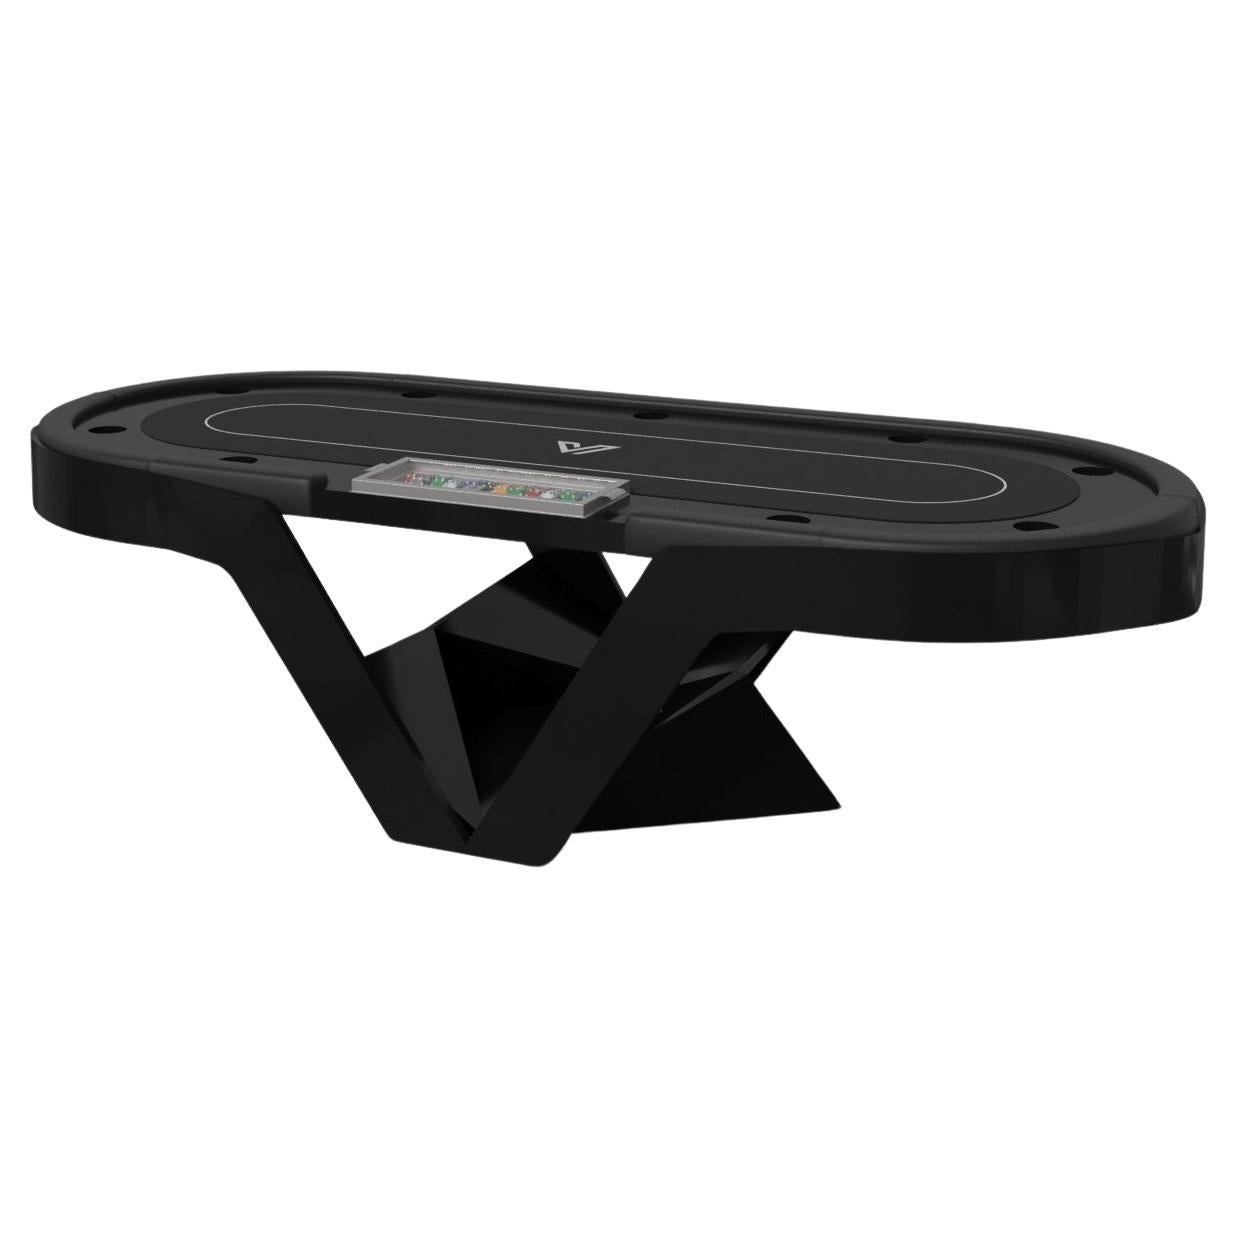 Elevate Customs Enzo Poker Tables / Solid Pantone Black Color in 8'8" - USA For Sale